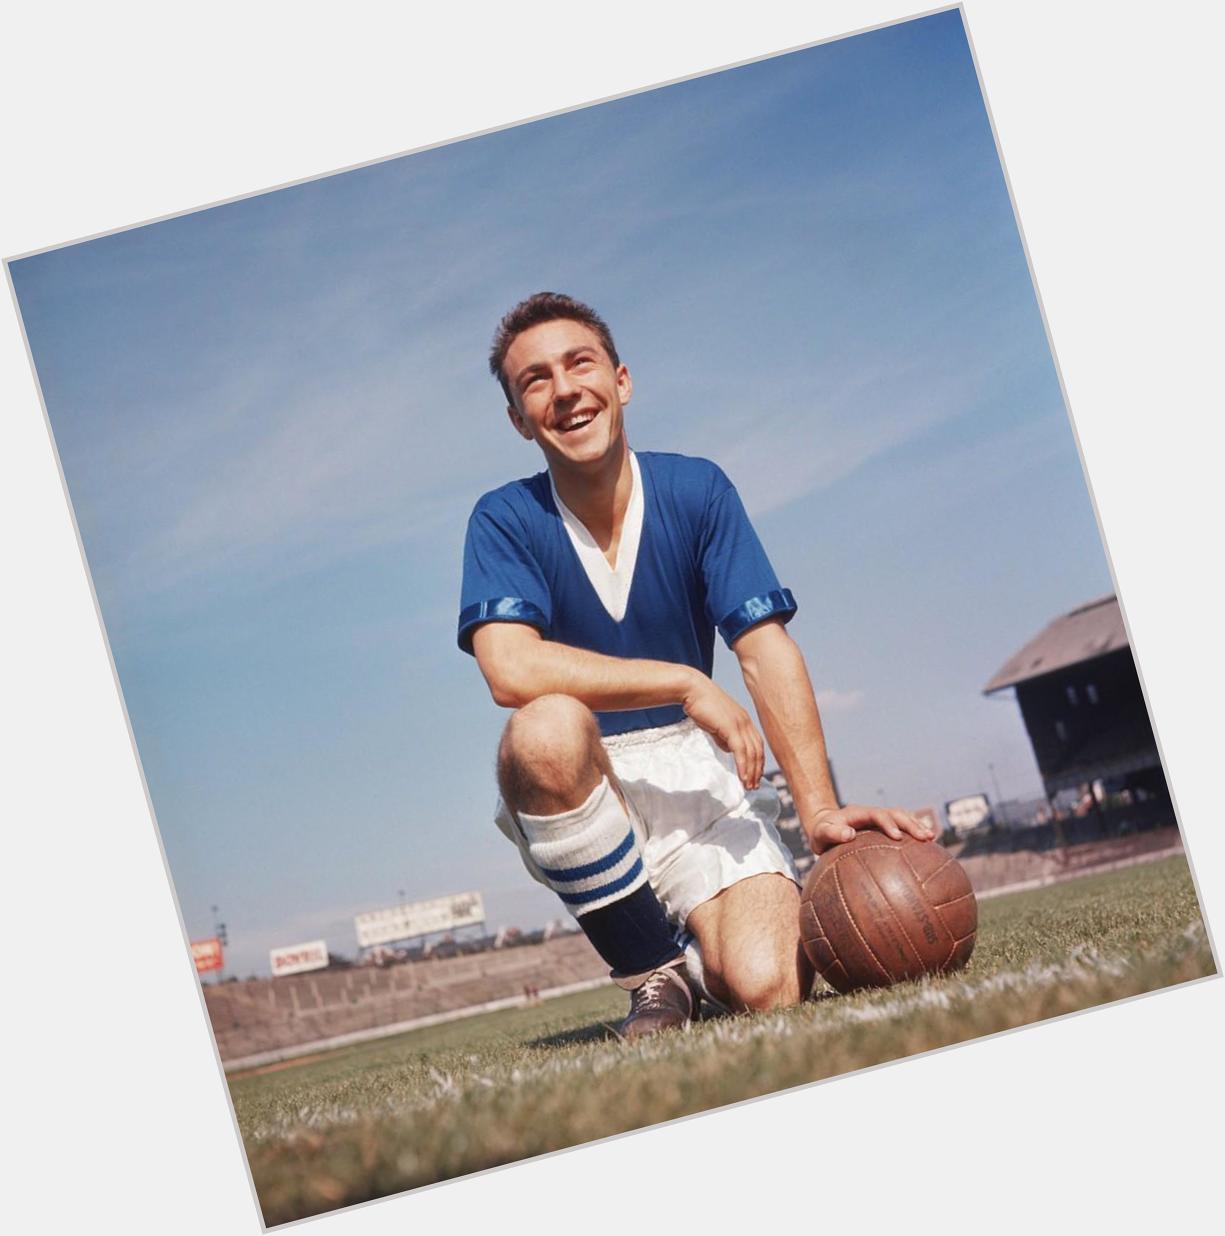 Happy 75th Birthday to Jimmy Greaves. Jimmy is still the record Goalscorer in the first division with 357 goals. 